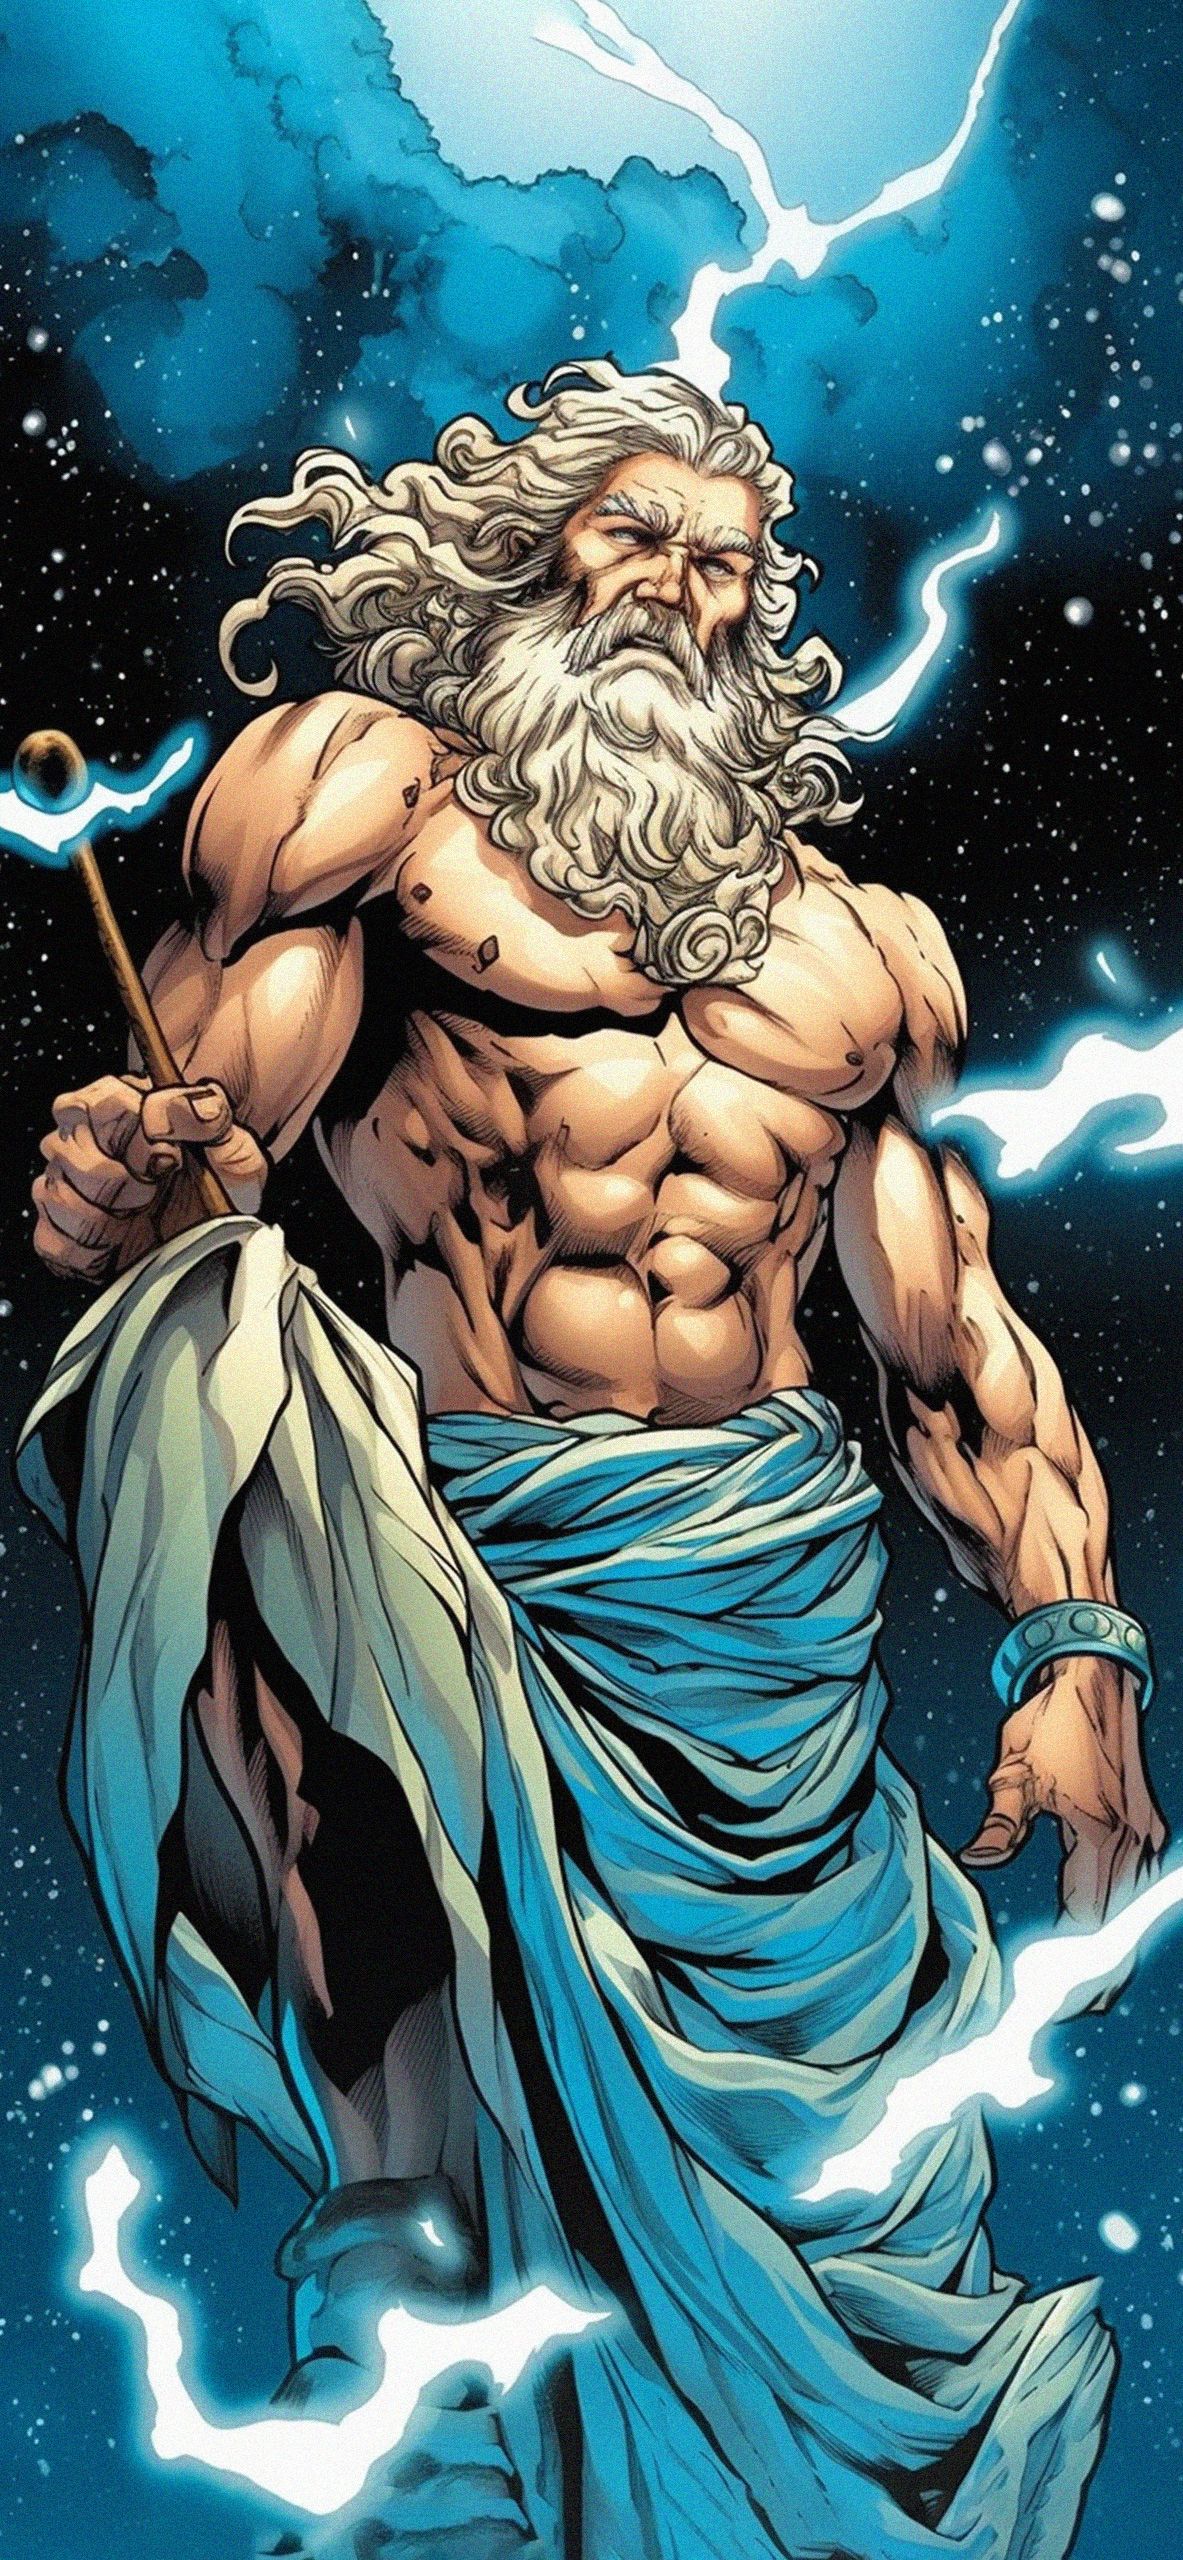 Zeus, the Greek king of the gods, is depicted in this image as a muscular and bearded man with long white hair and beard. - Lightning